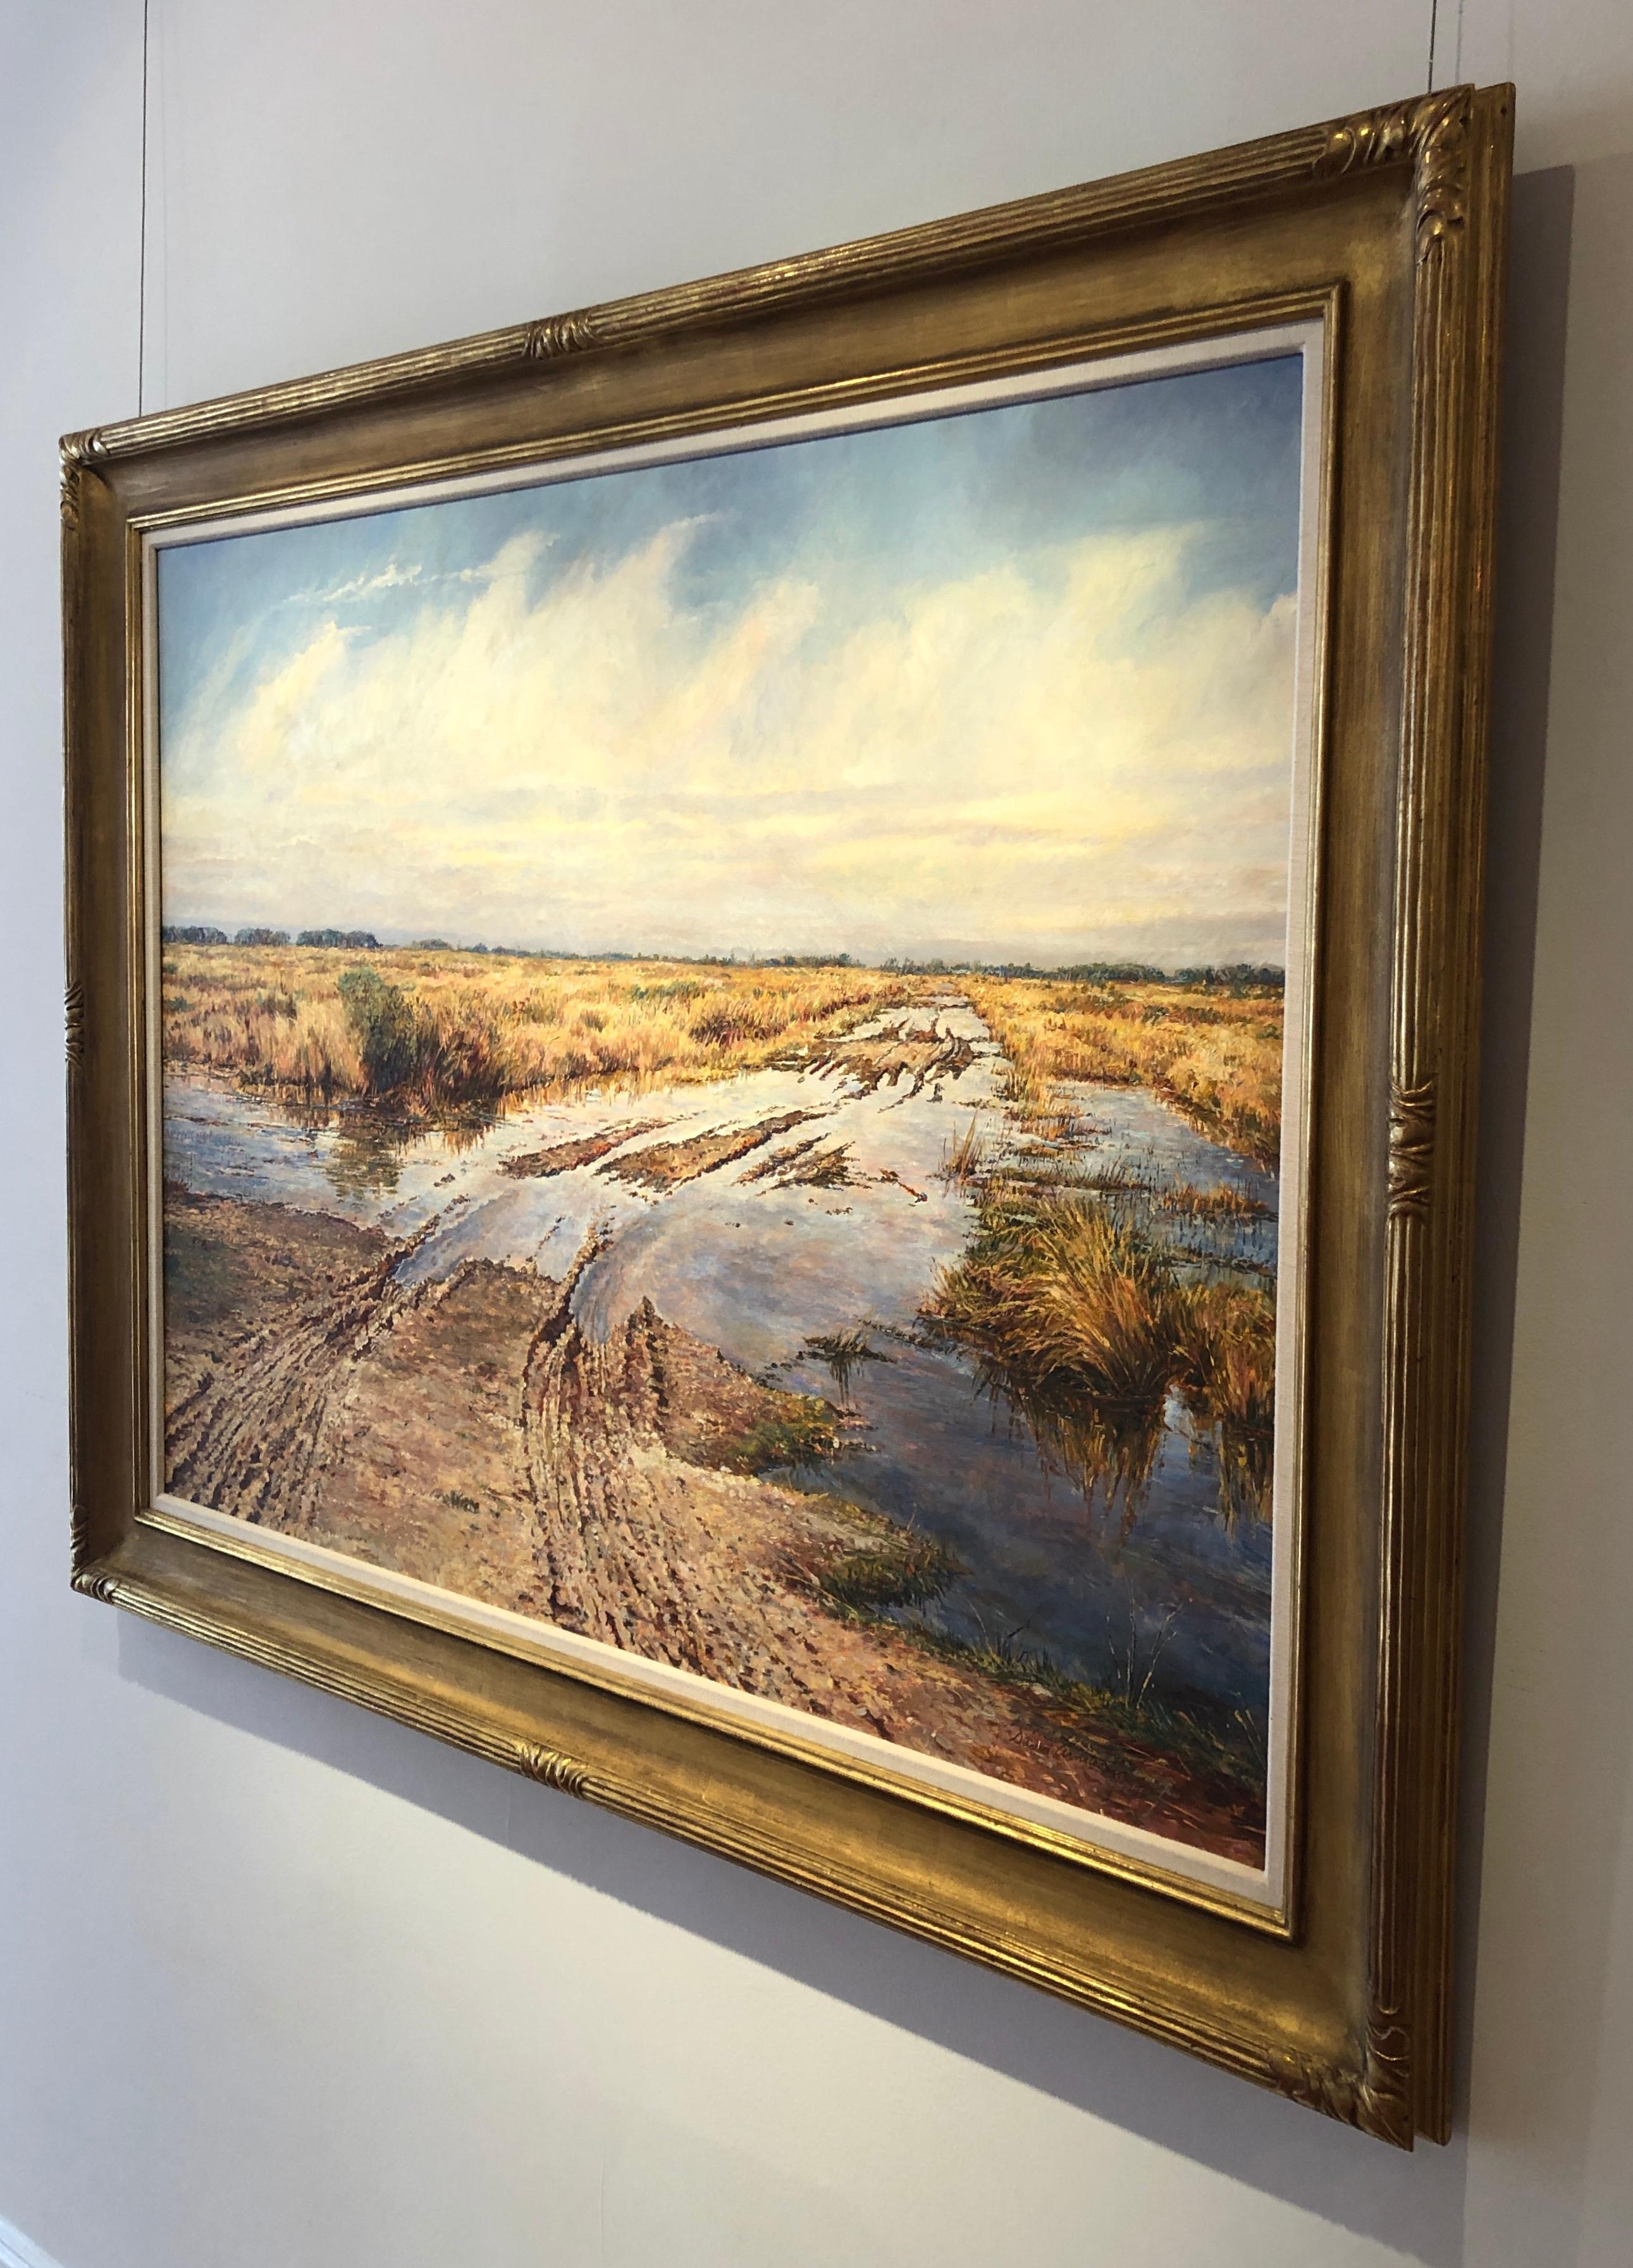 Winter landscape oil painting of a field with tire tracks by the late great American painter, David Armstrong. 
Framed dimensions are 44 1/2 x 56 inches.